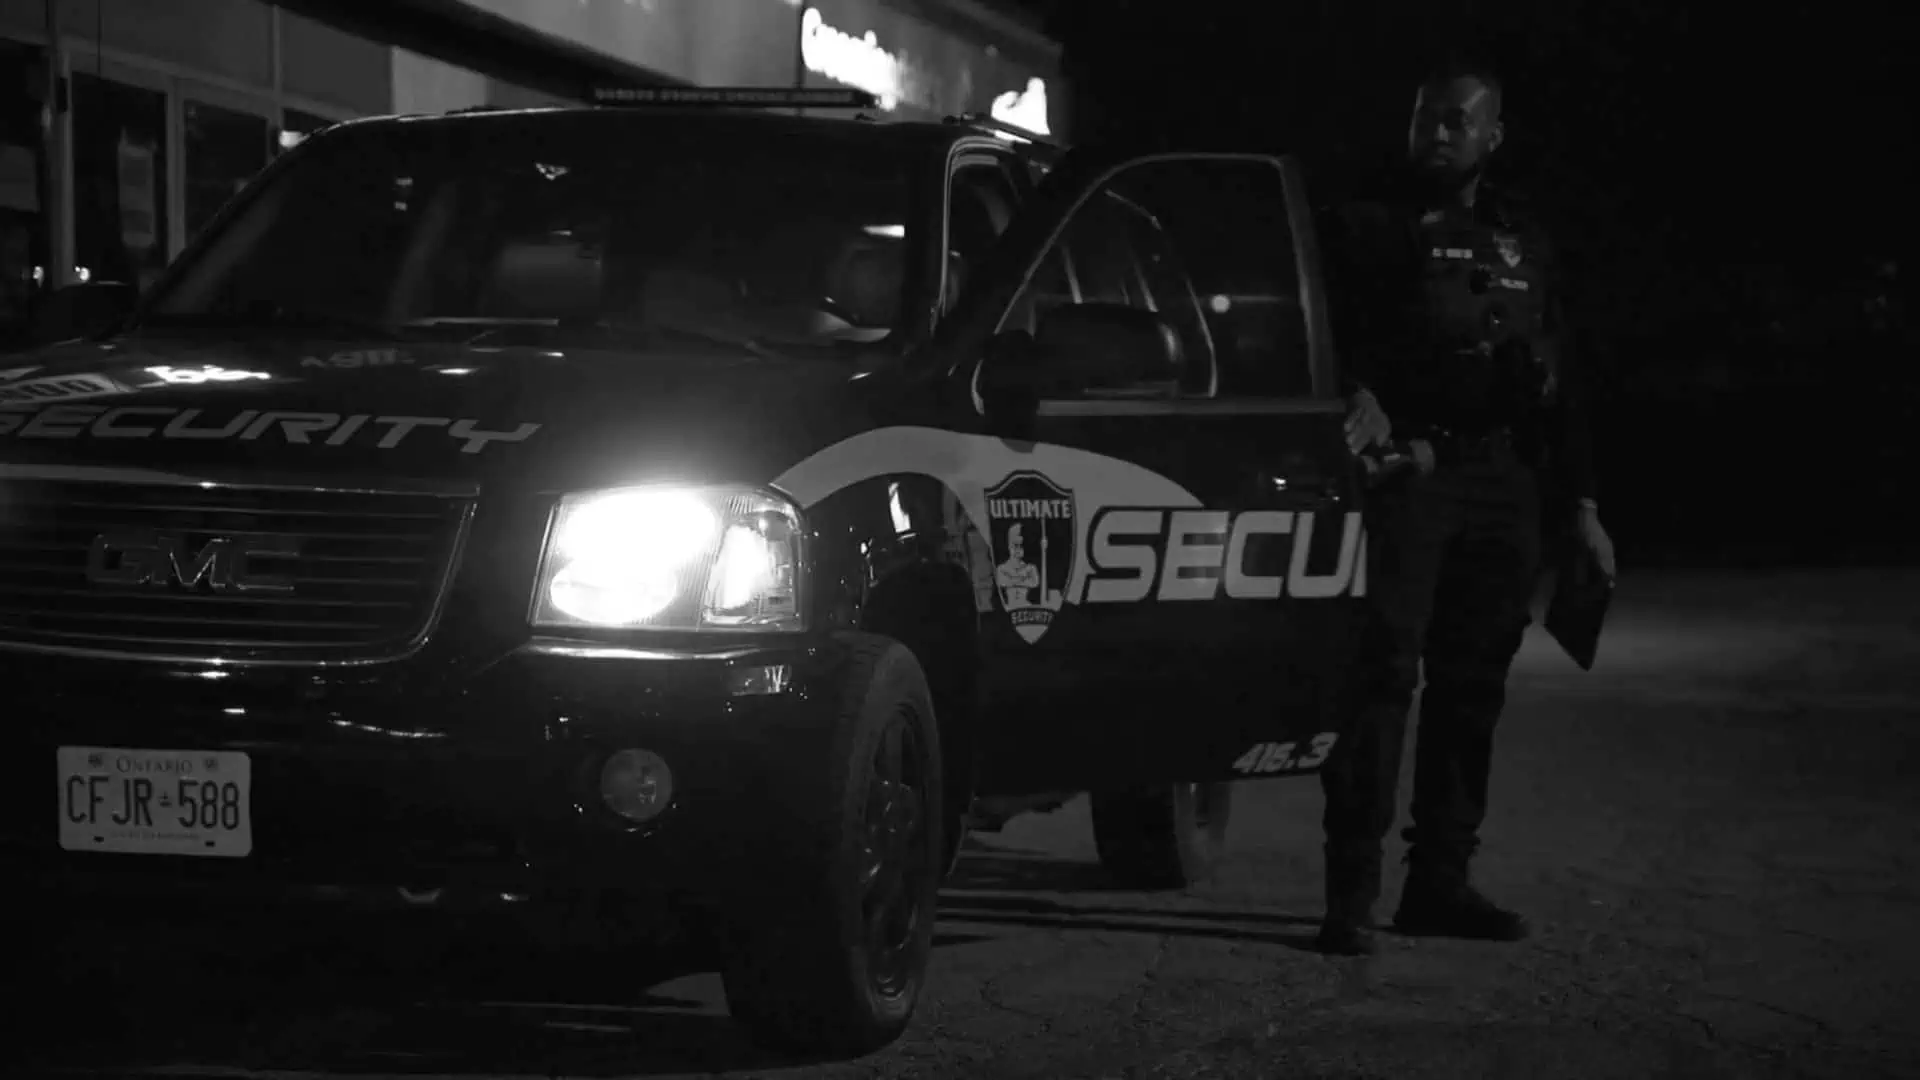 A security officer is conducting mobile patrol security services next to a police car at night.